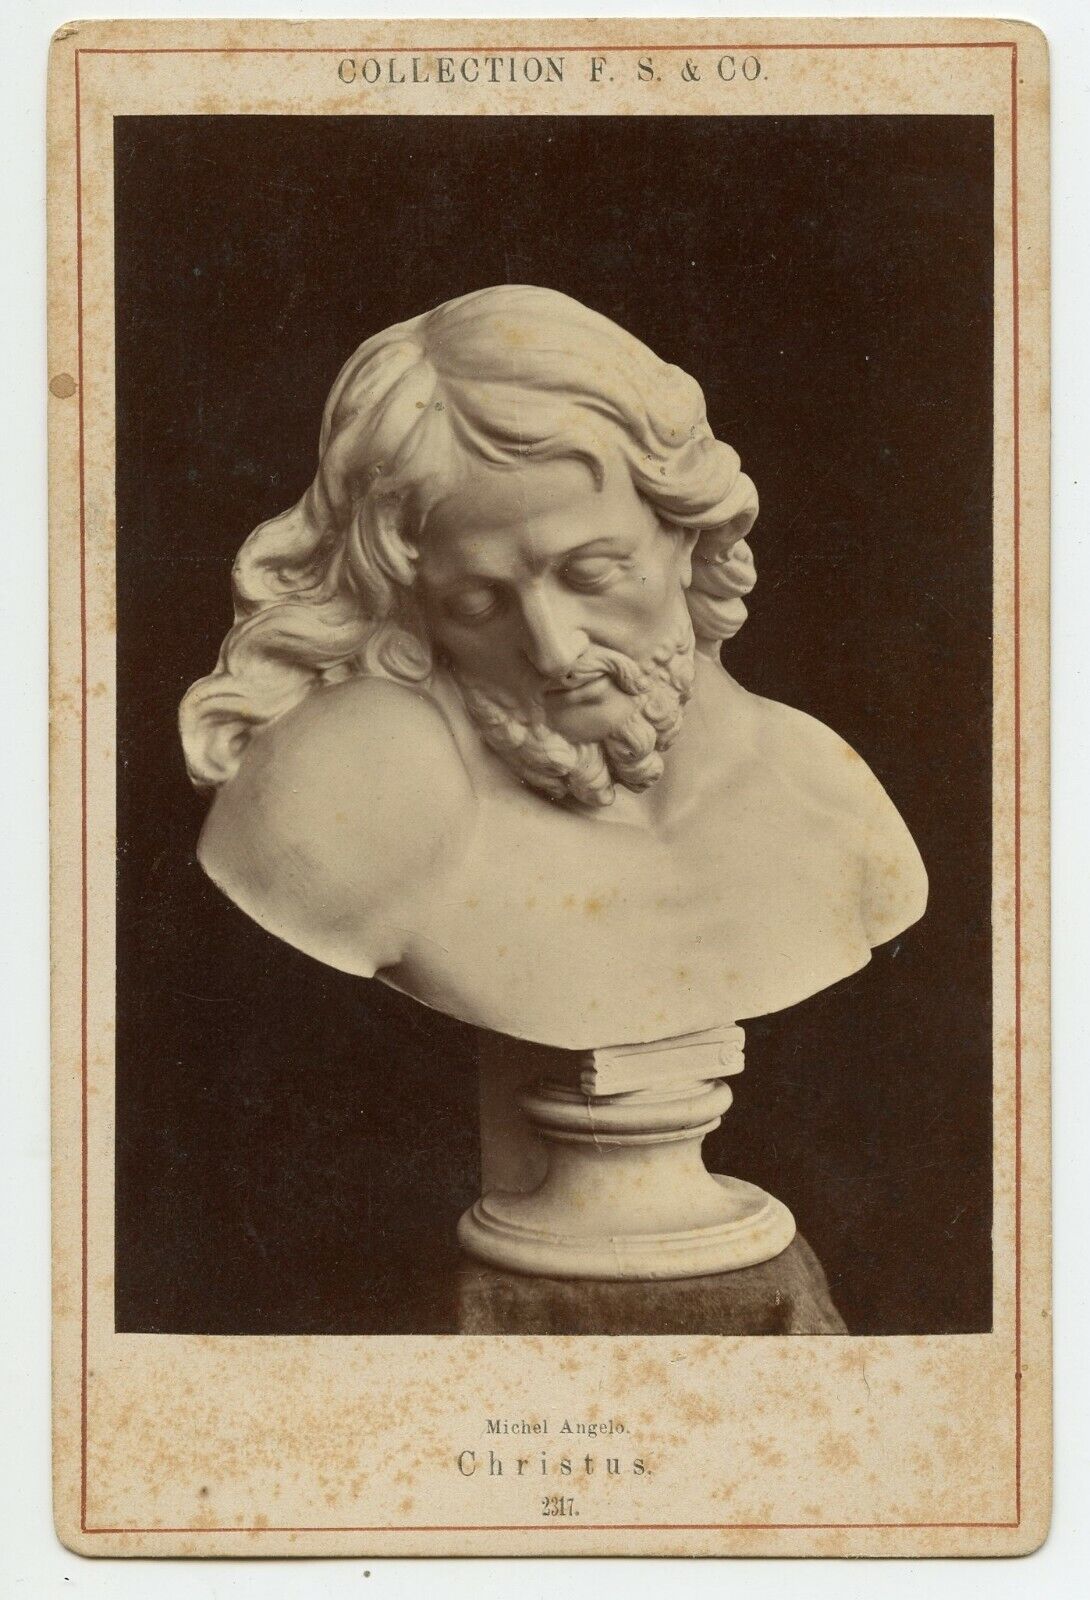 Michelangelo, Christus Sculpture, Vintage Photo by Collection F. S and Co. 